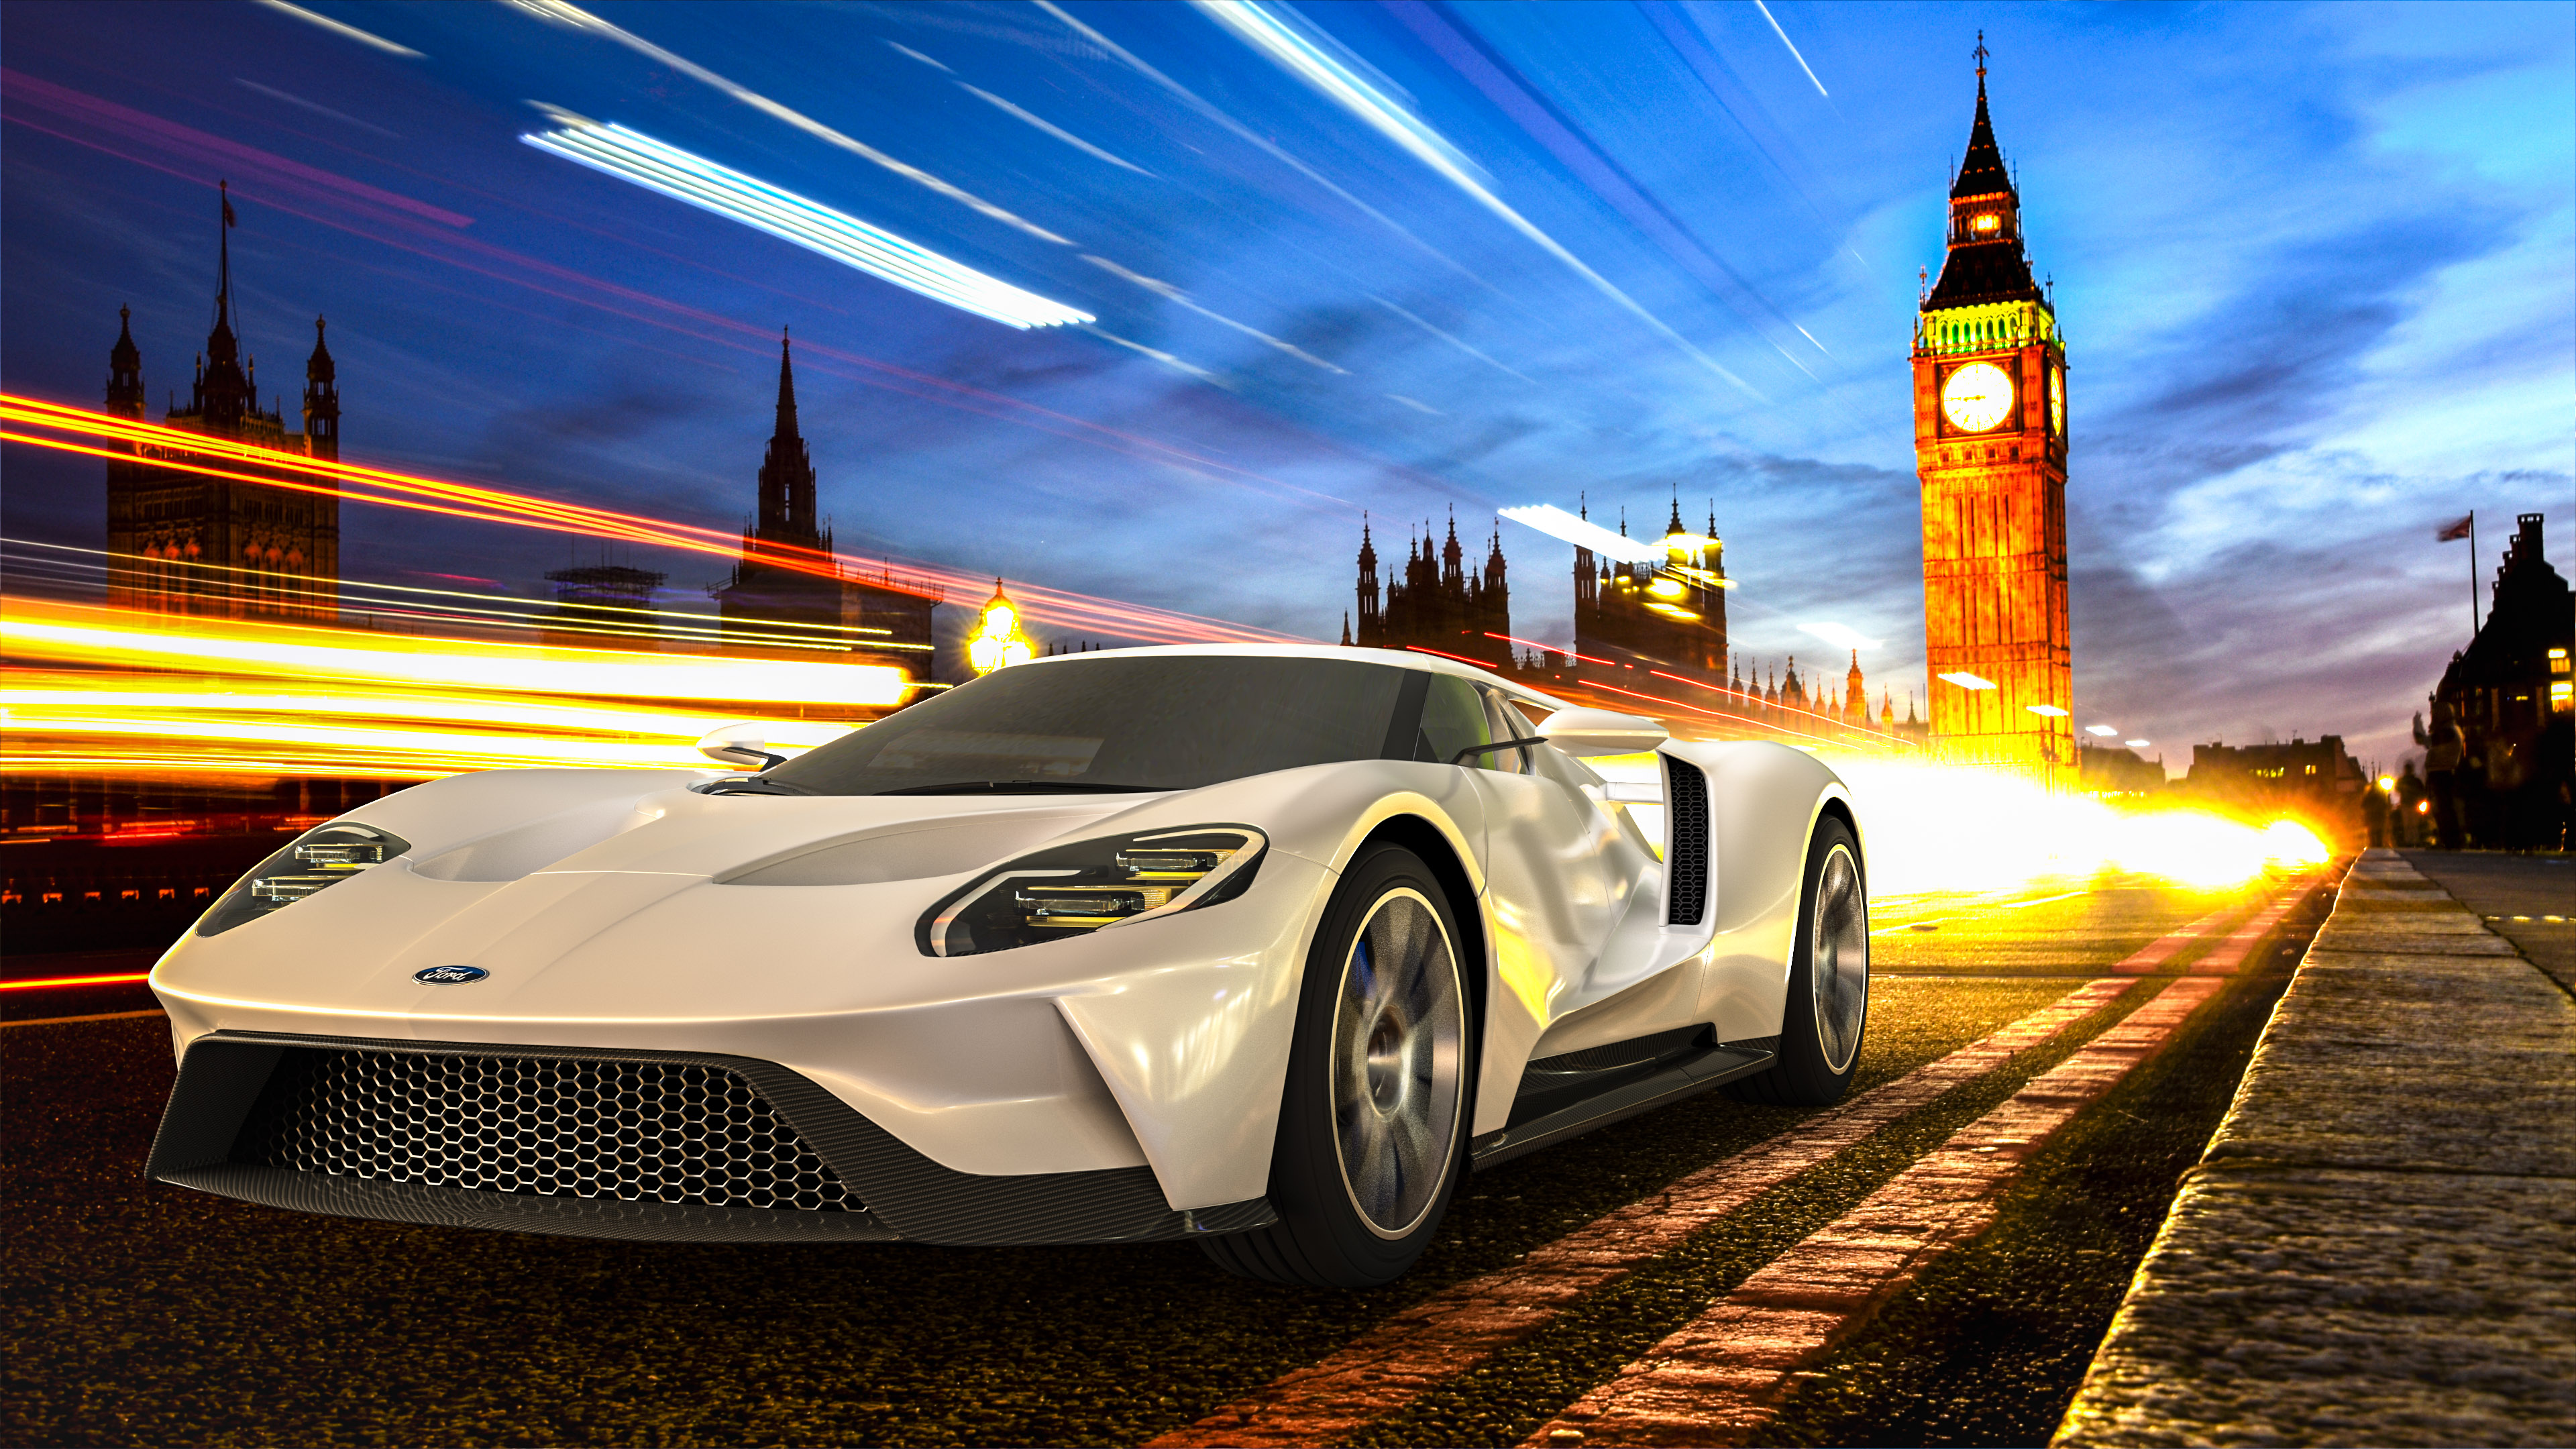 Experience the thrill of speed with our cool supercar wallpaper featuring the Ford GT, a testament to American engineering and performance.